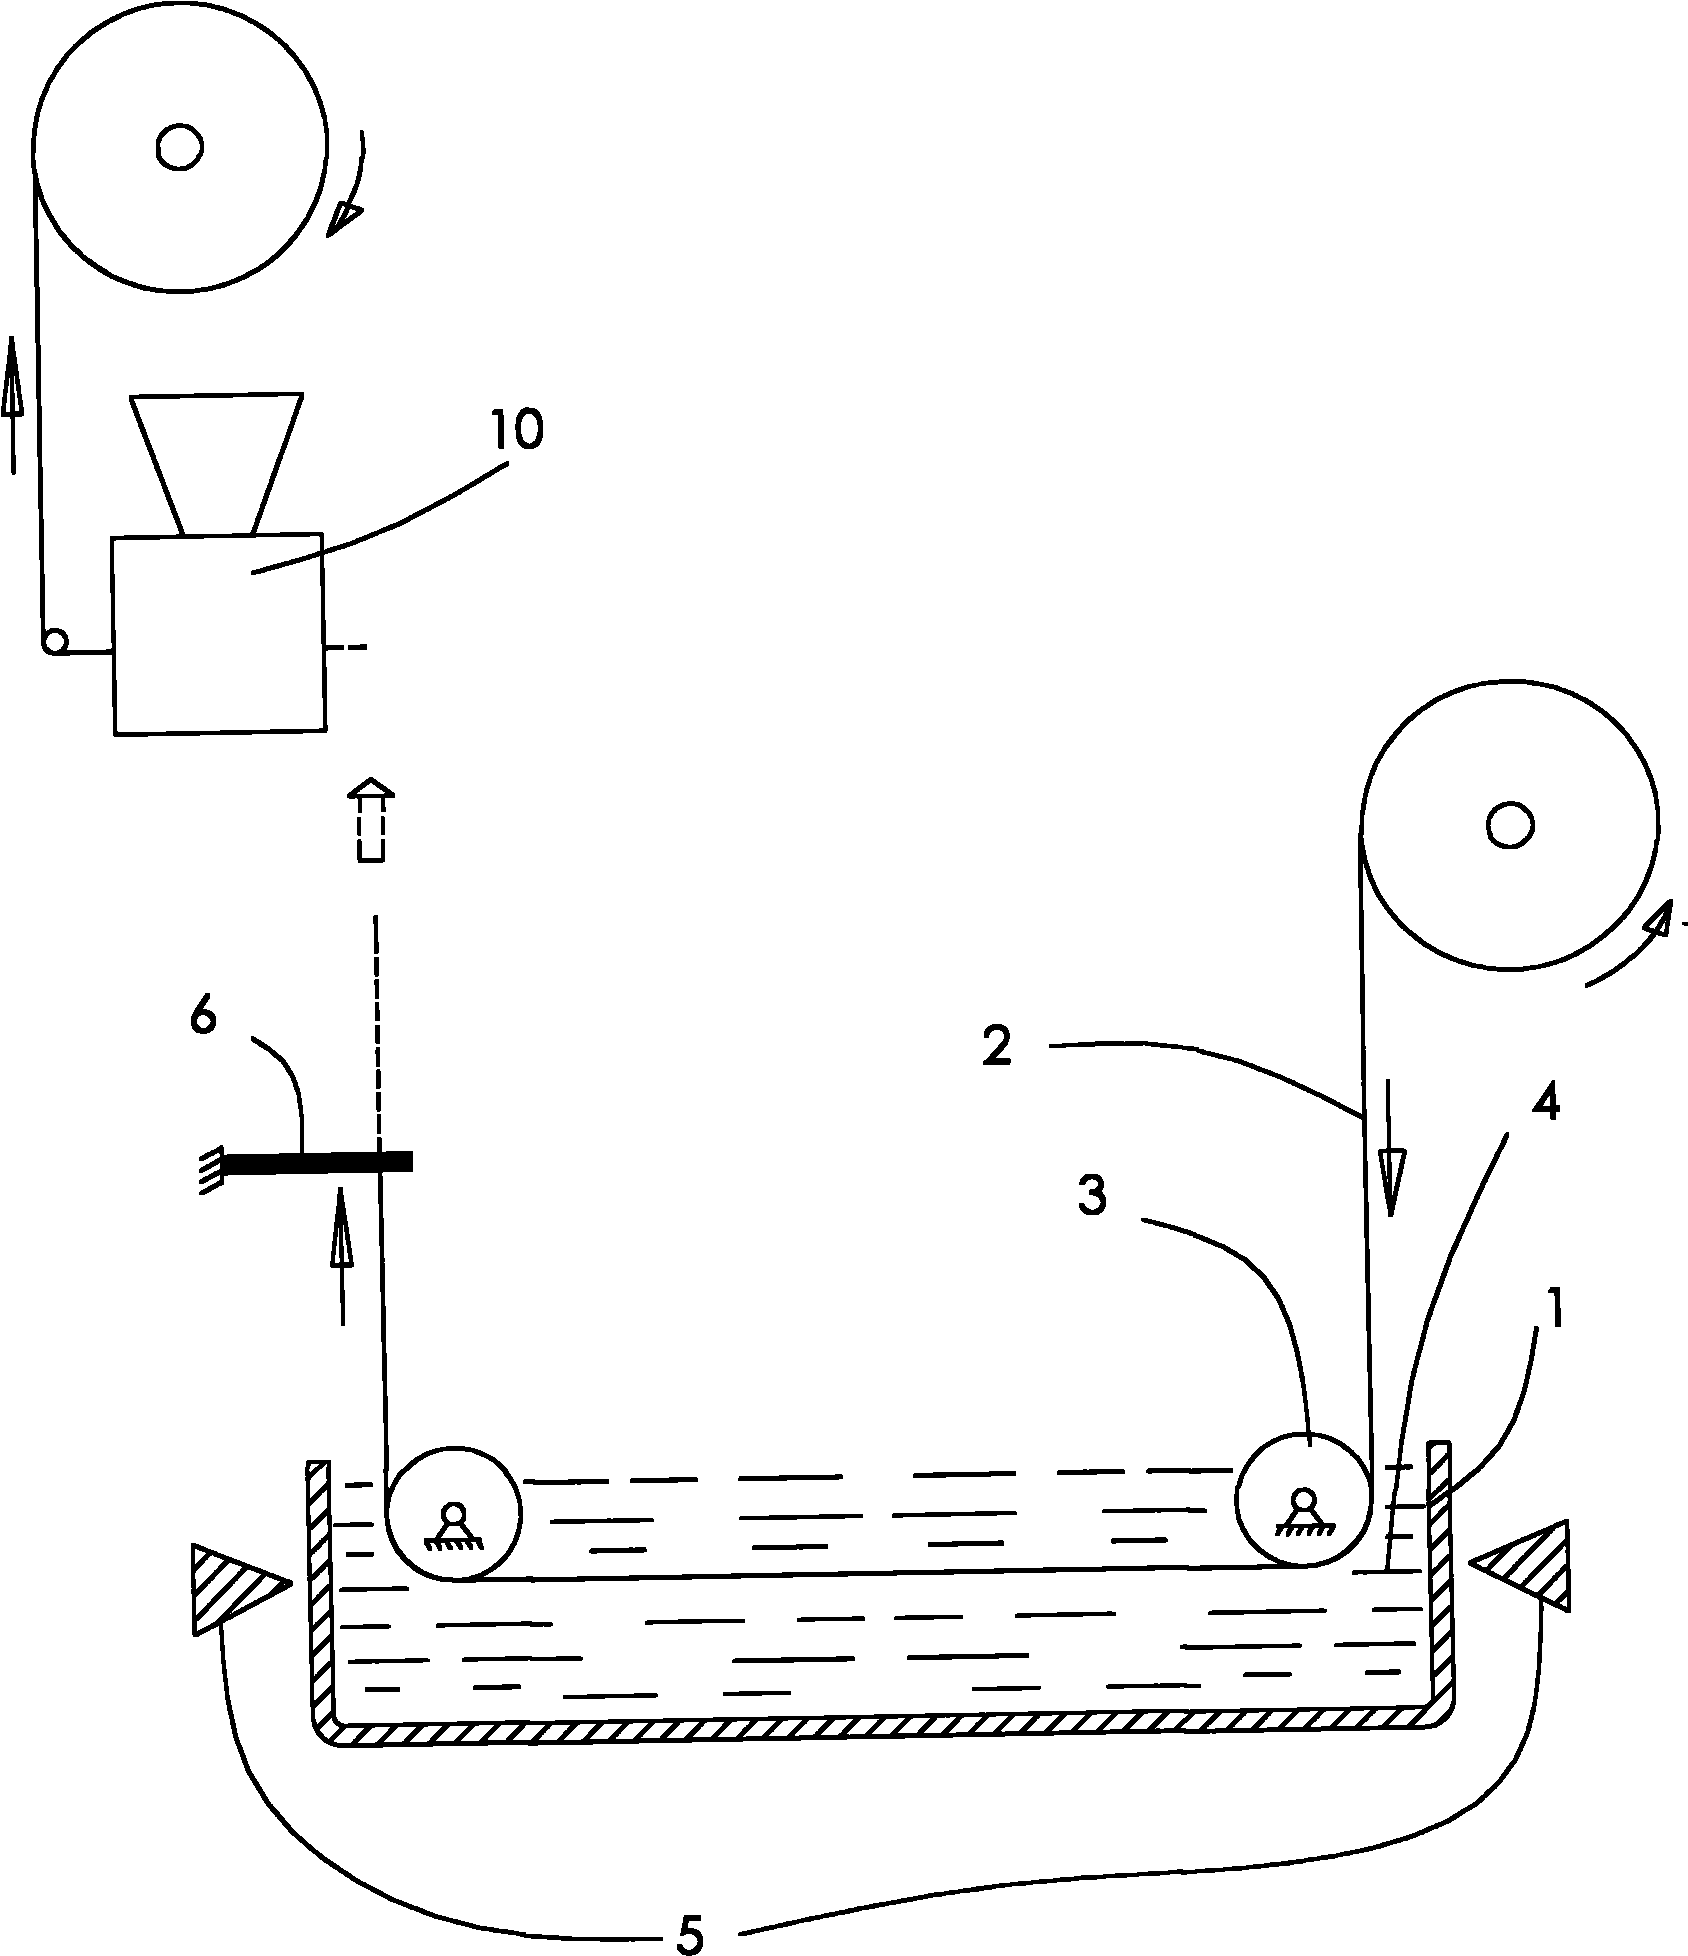 Method for producing reinforced carbon nano pipeline adopting fiber yarns as carriers